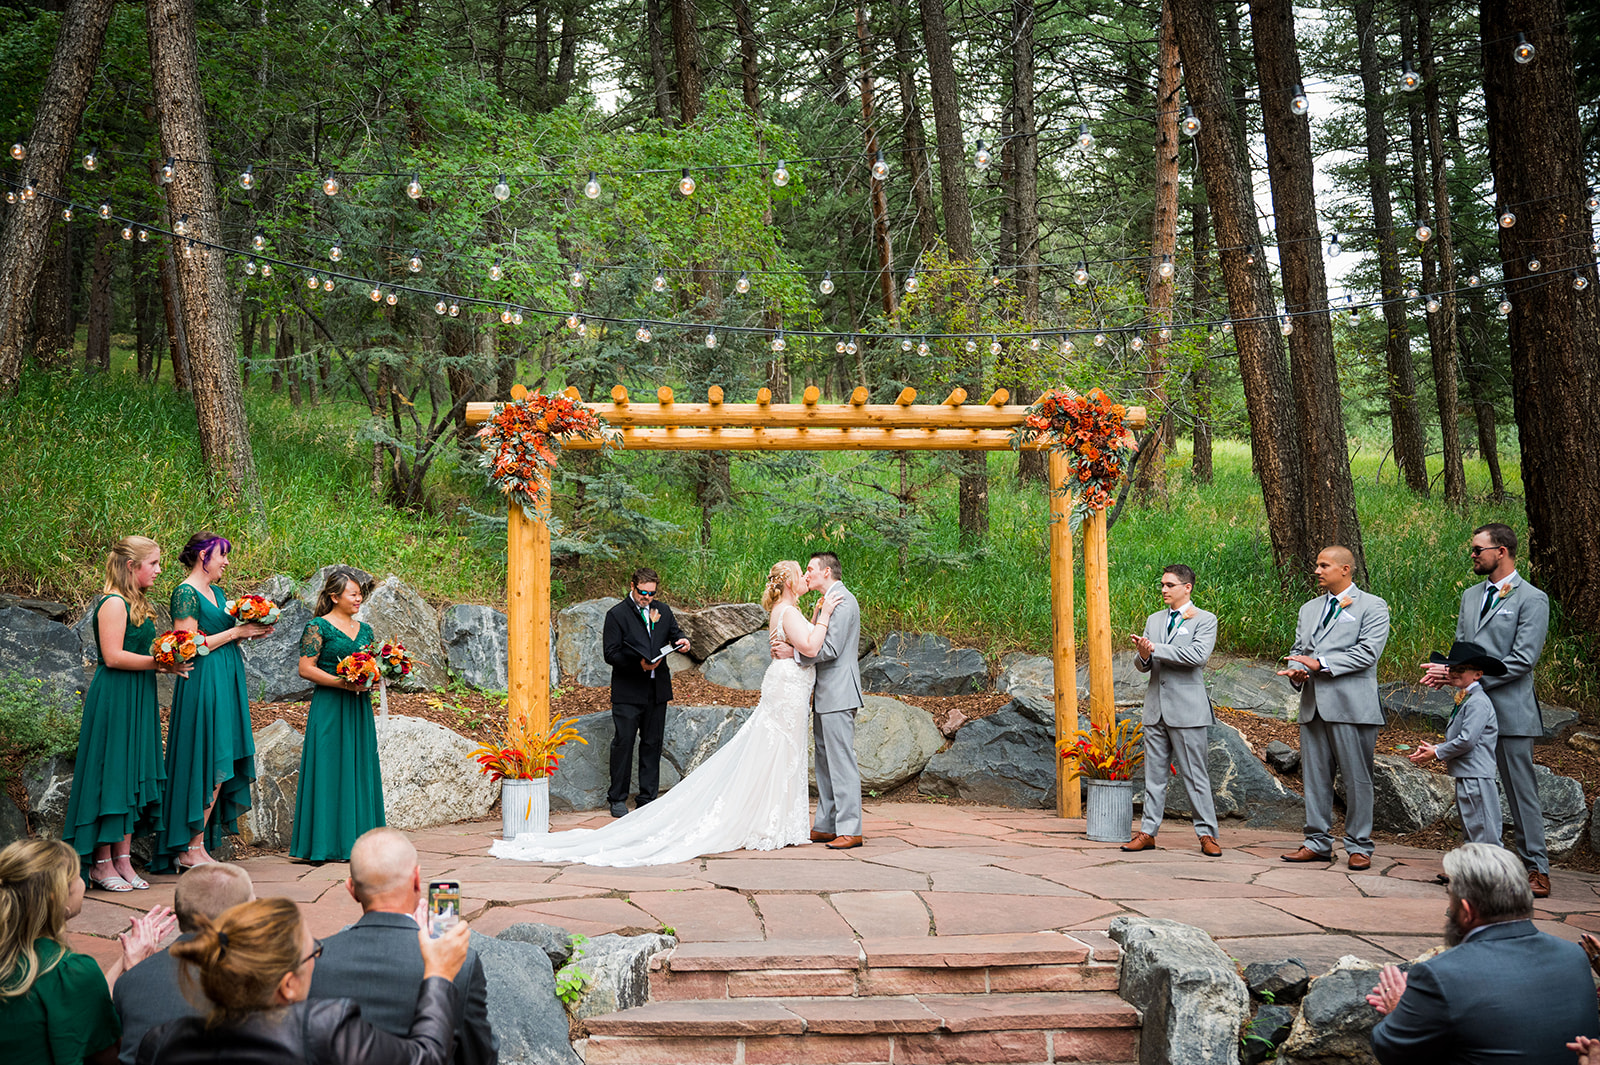 A couple sharing their first kiss under a wedding arbor at The Pines by Wedgewood Weddings in Genesee, Colorado.